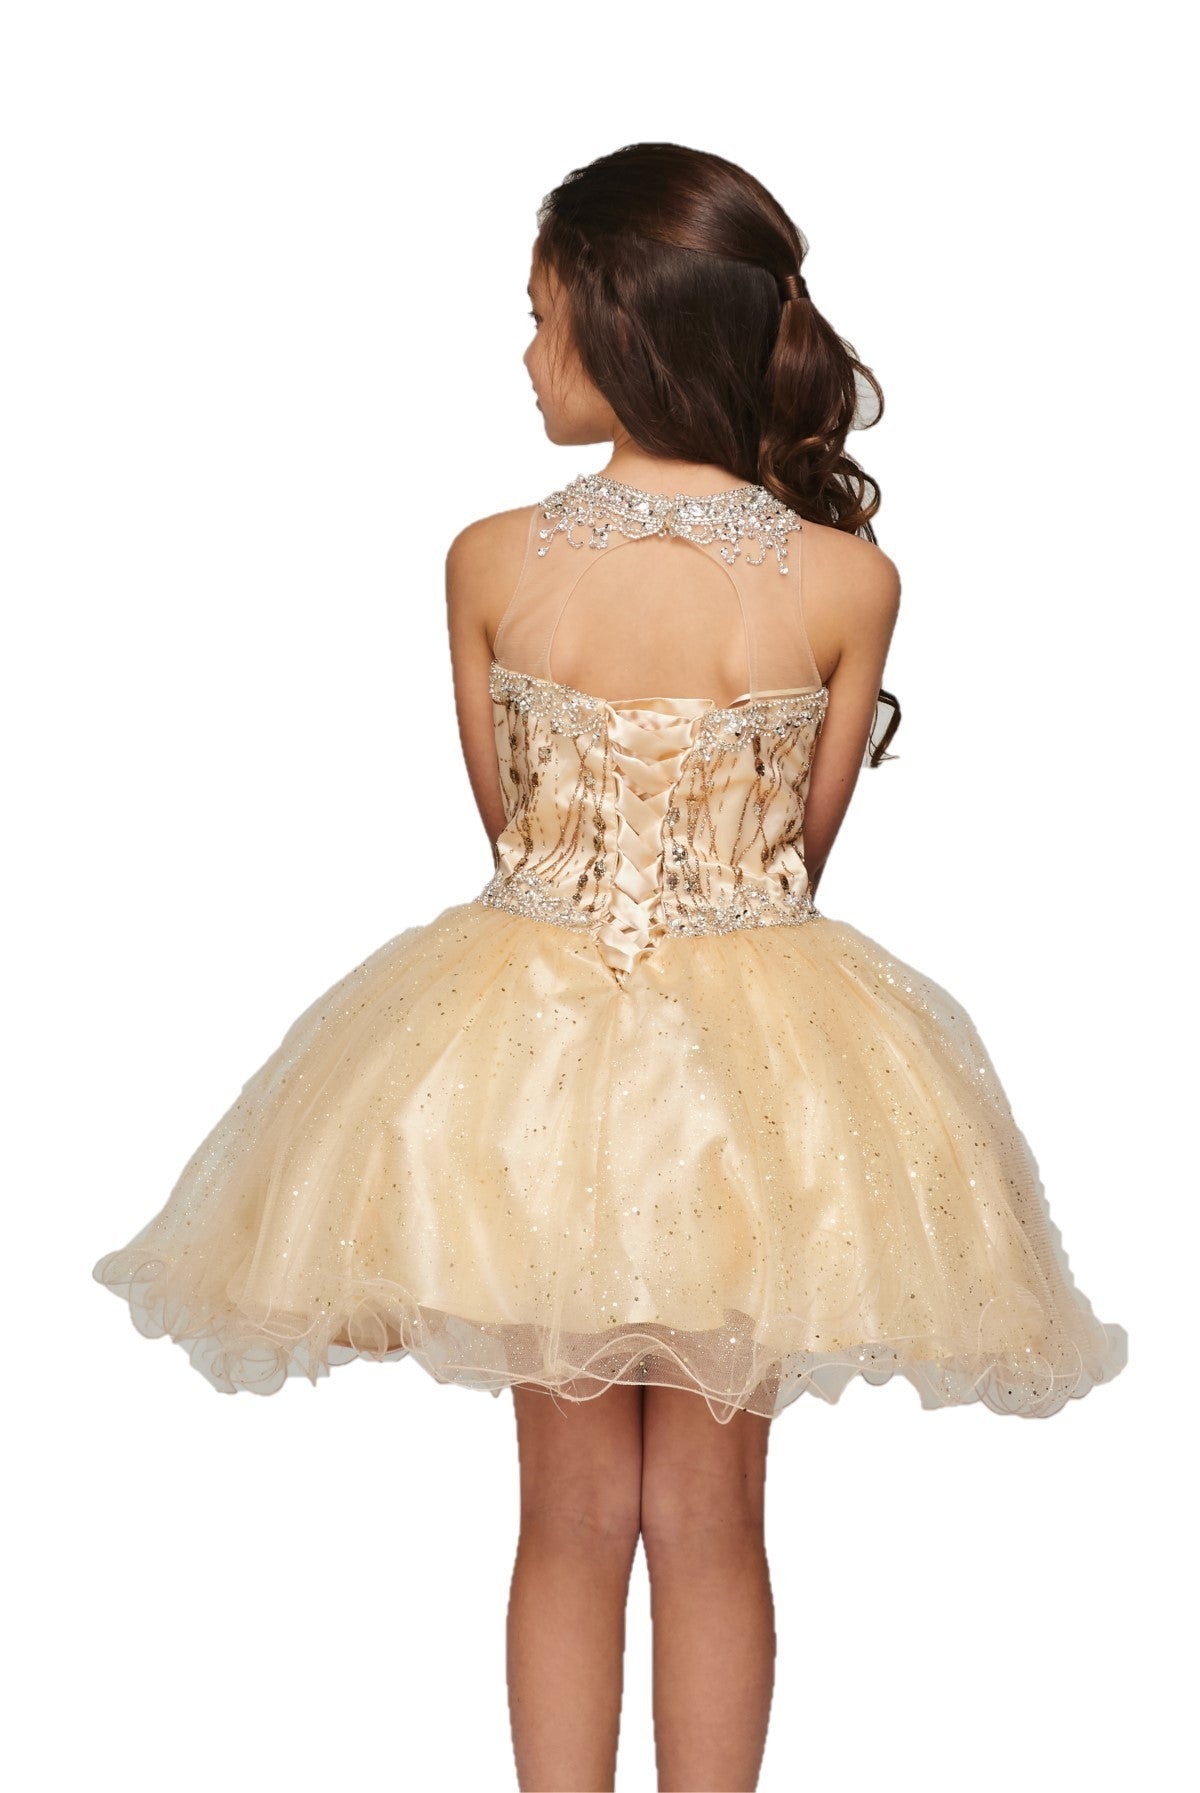 Halter Rhinestone Tulle Girl Party Dress by Cinderella Couture USA 5090